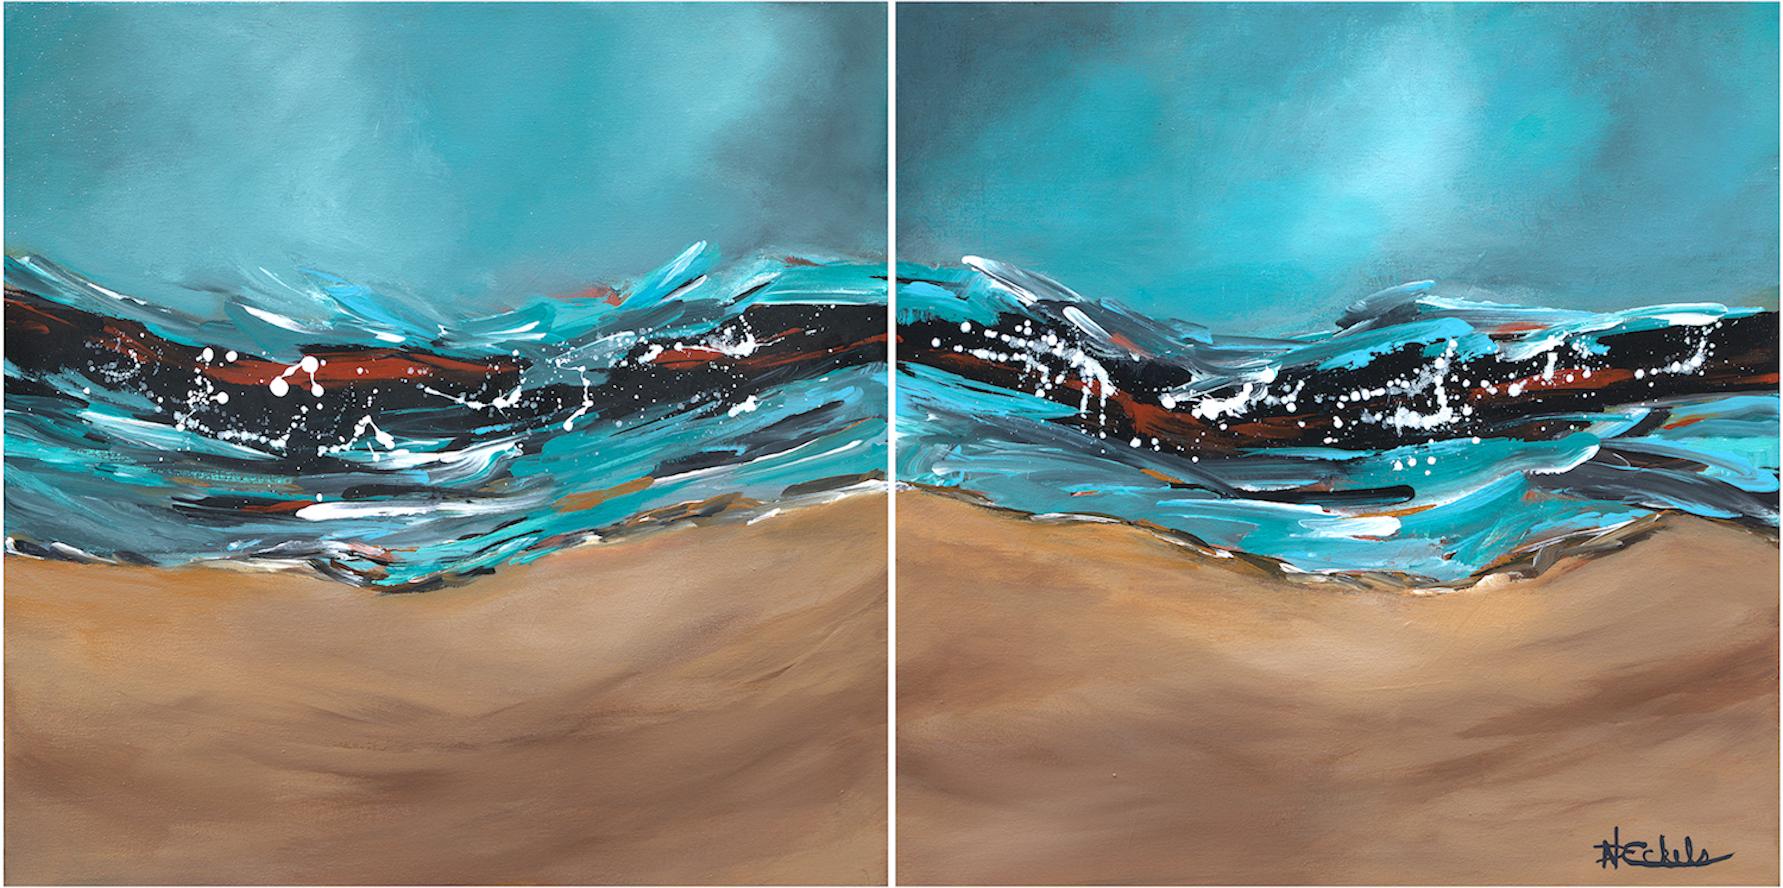 Nancy Eckels Abstract Painting - "Waves and Wet Sand" Mixed Media abstract with textural blues, white and tans